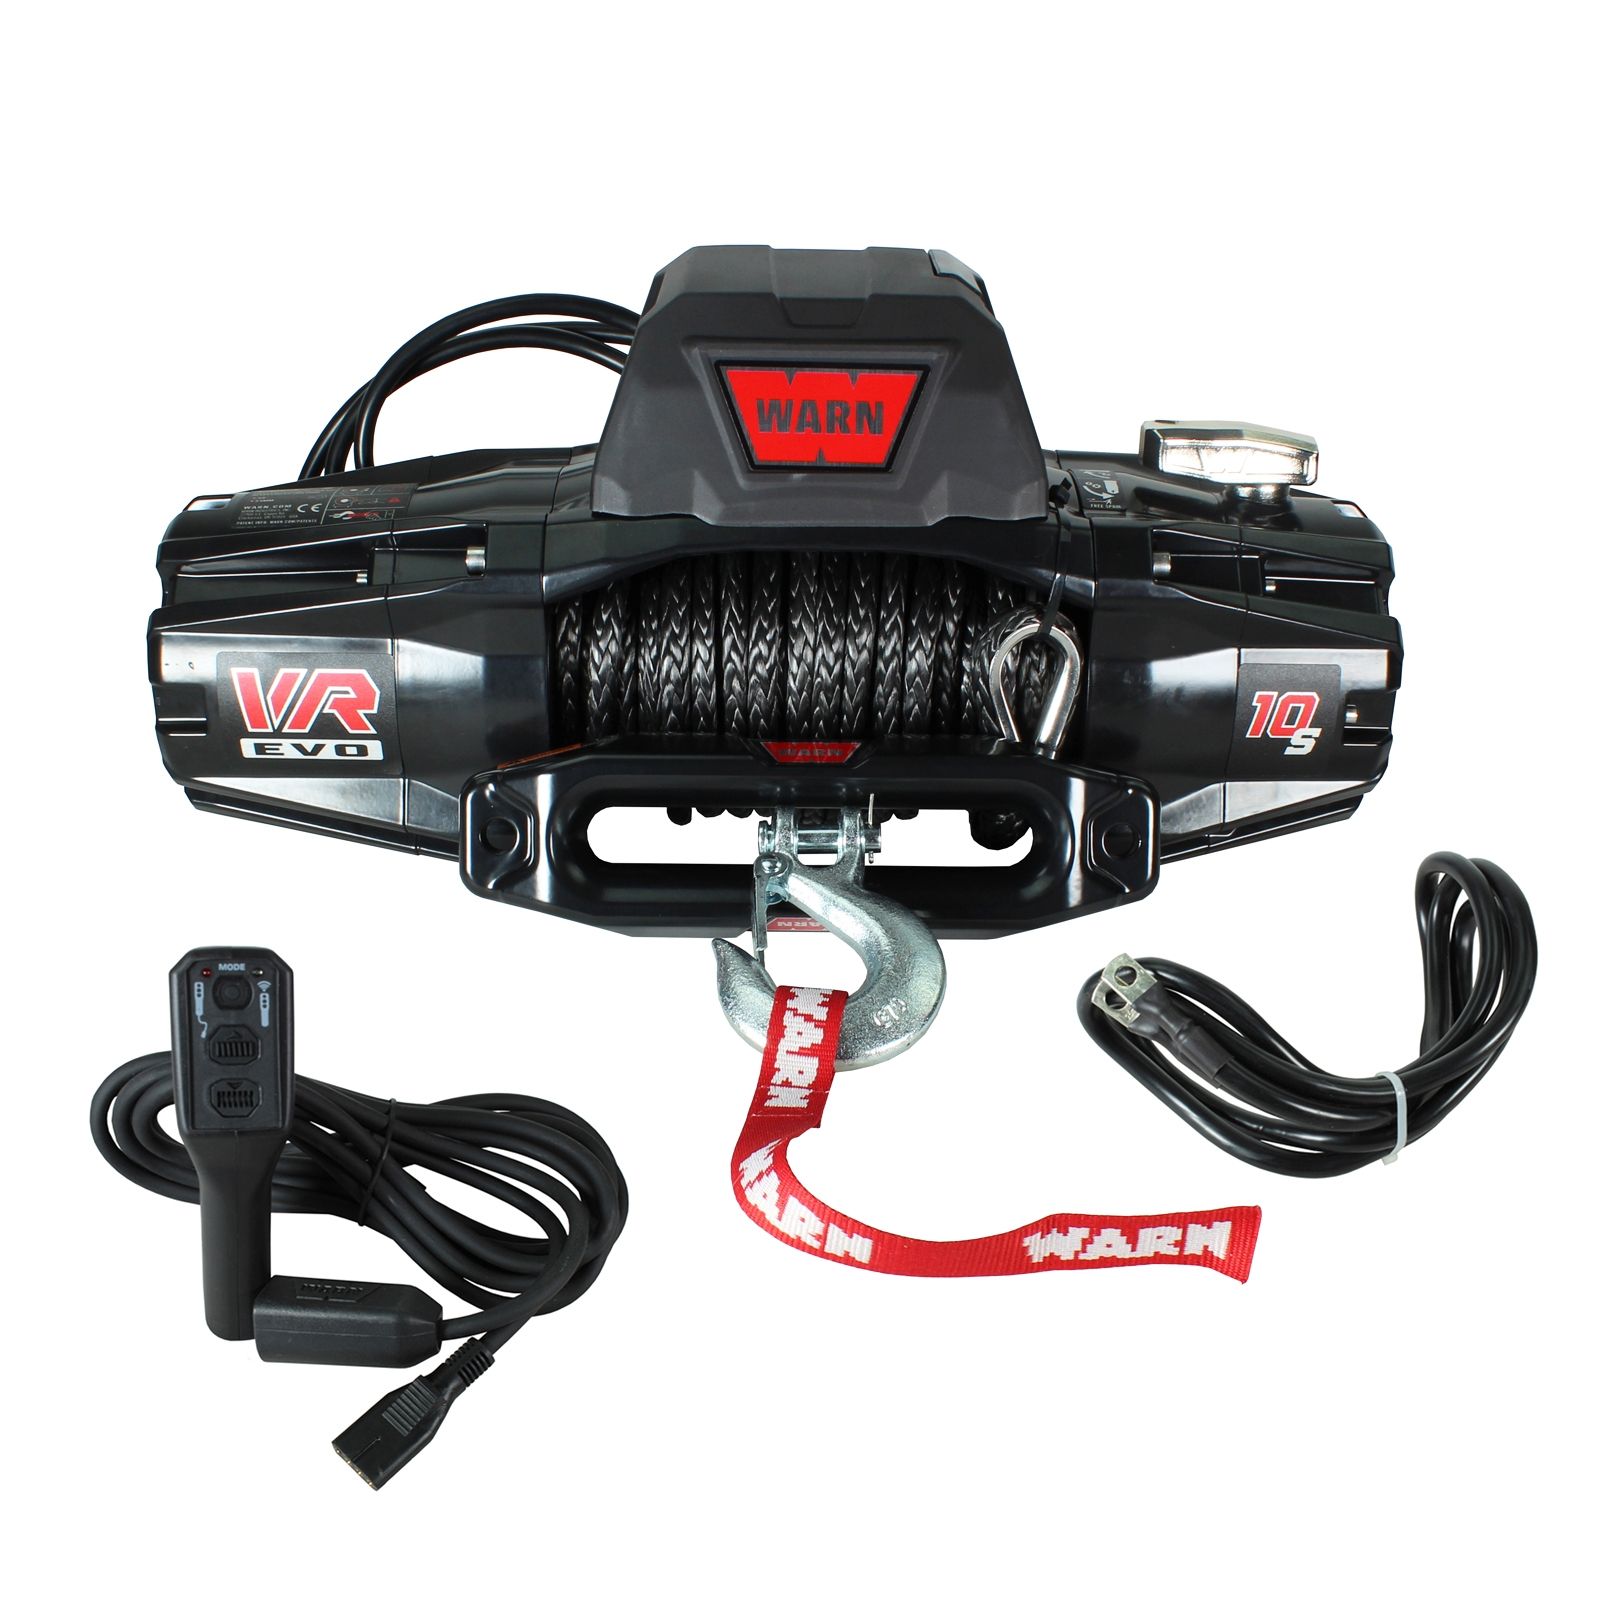 Warn VR Evo 10 12v Steel Rope Electric Winch with Wireless overview